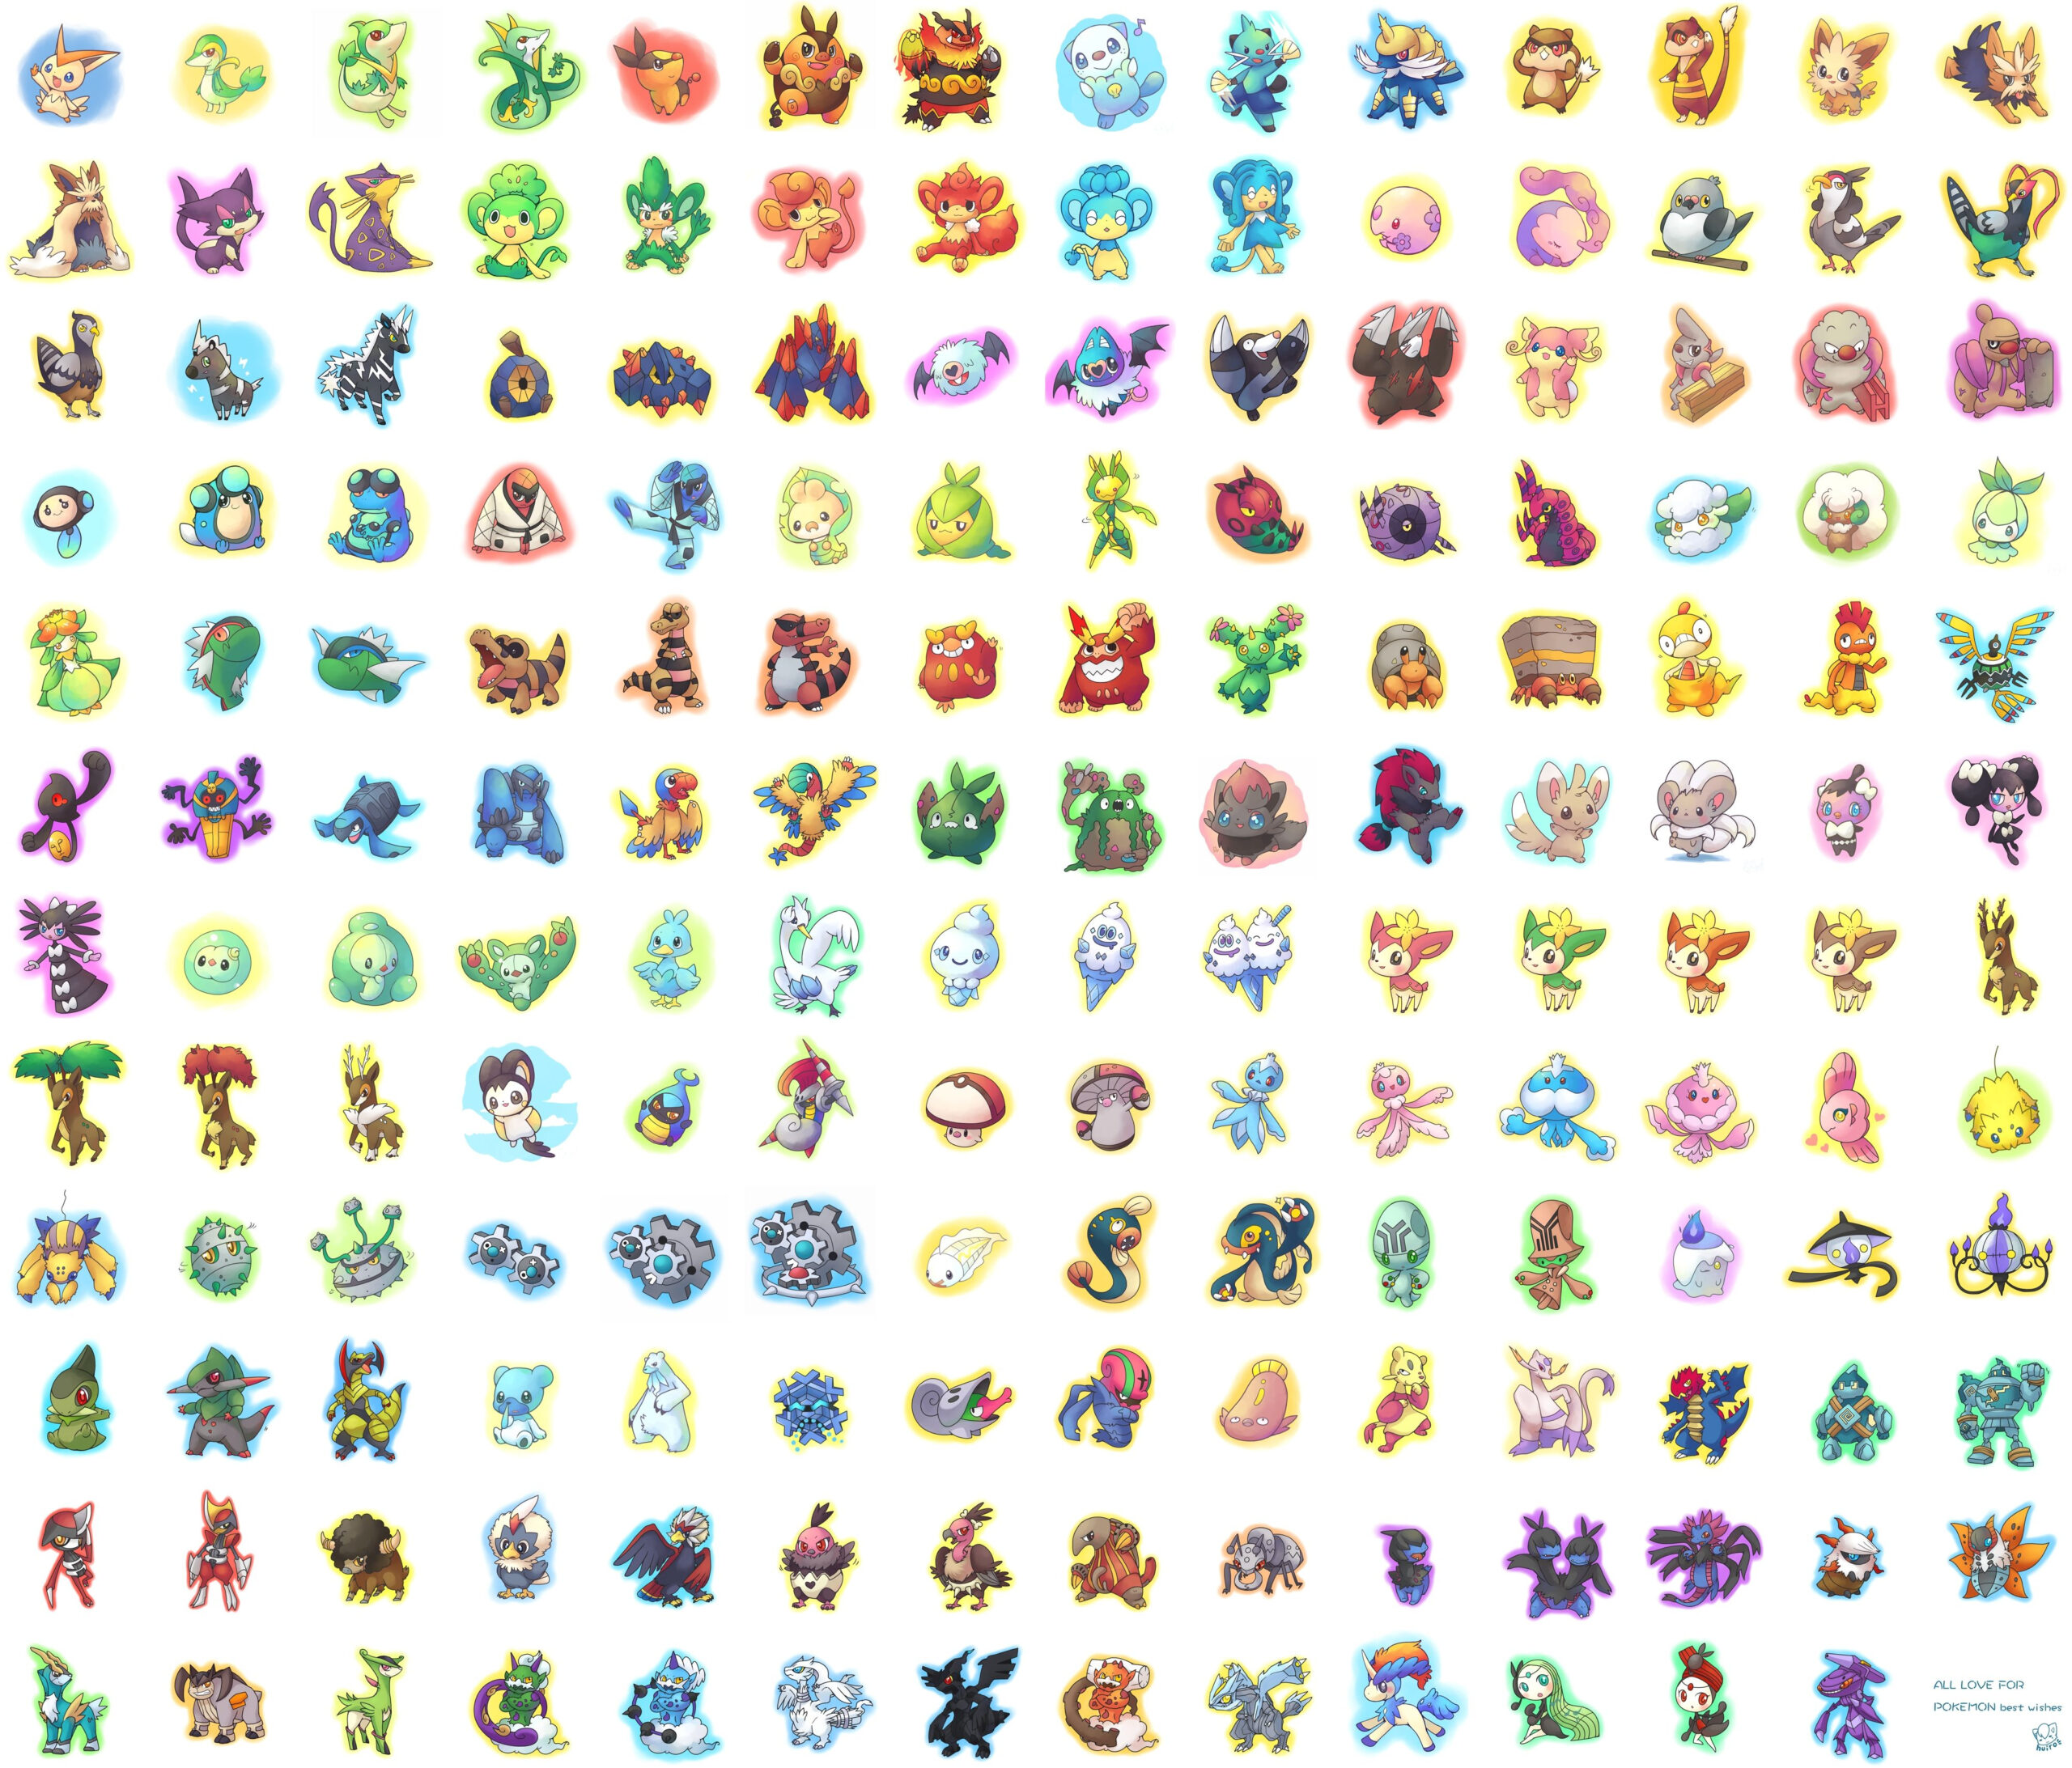 Pictures Of All Pokemon Characters